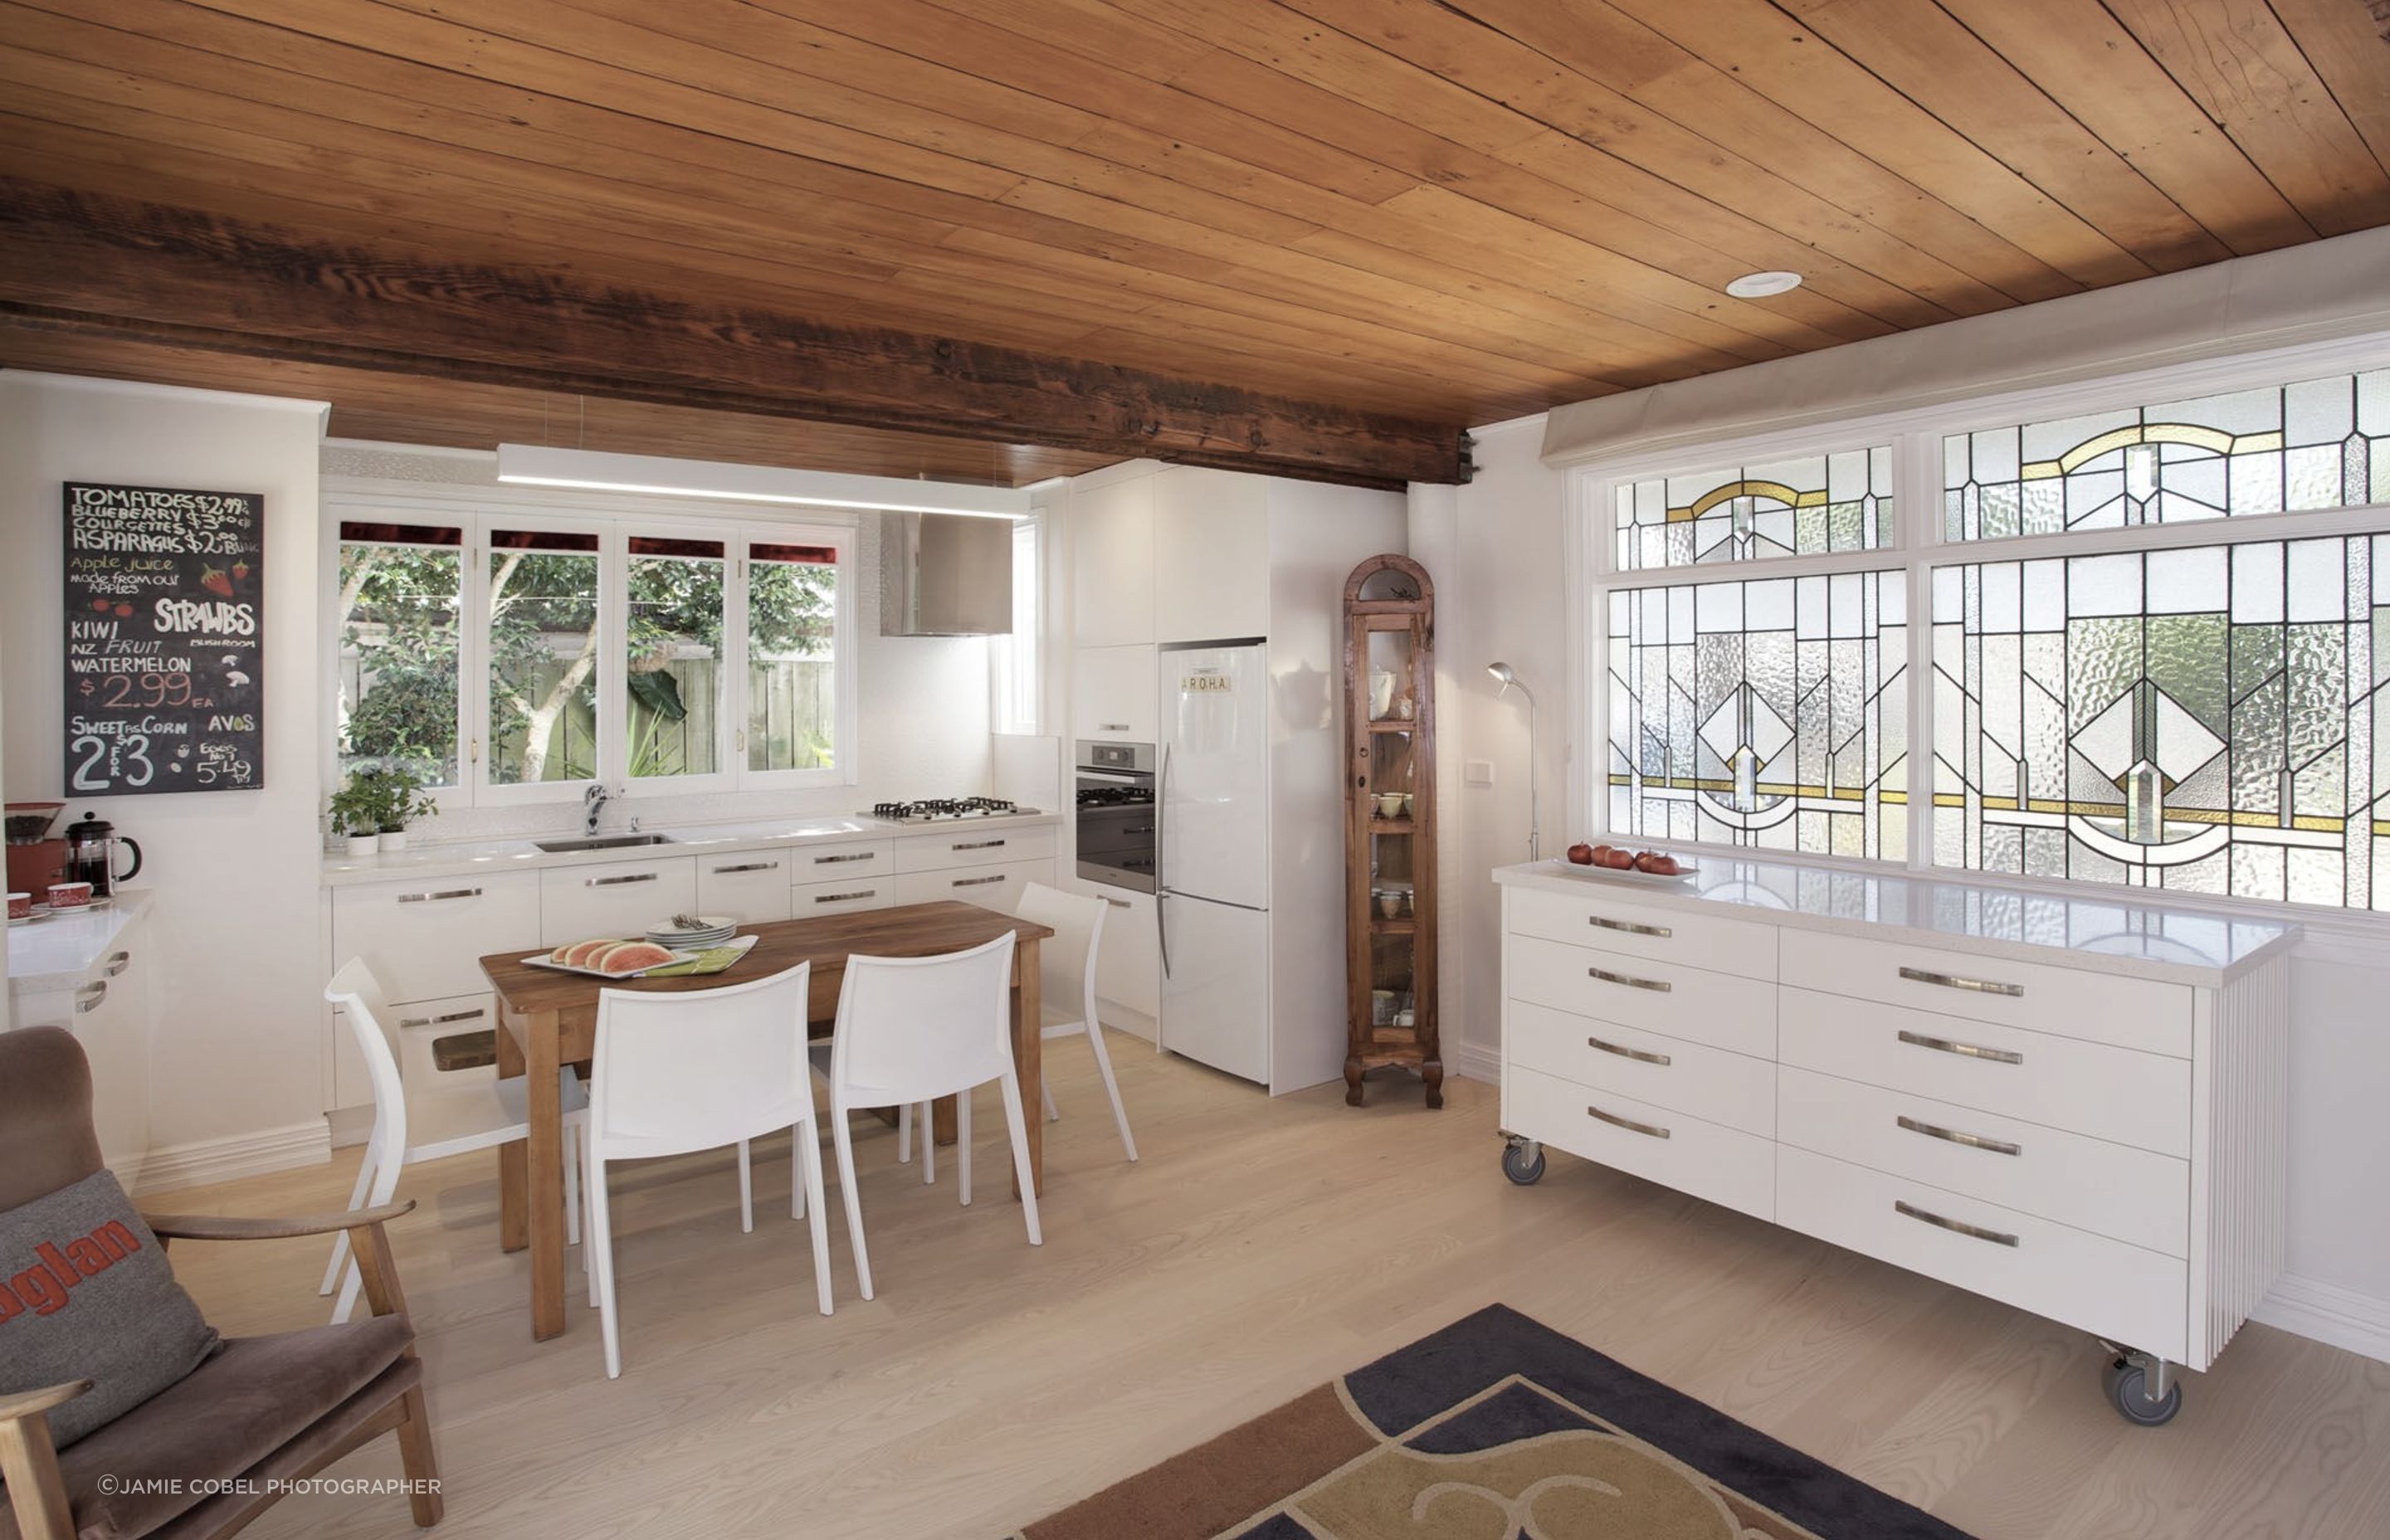 Here the island is shifted to below the leadlight window so the entire room can be utilised for dining or living. Perfect for the large gatherings of friends and families in such a compact efficient cottage.